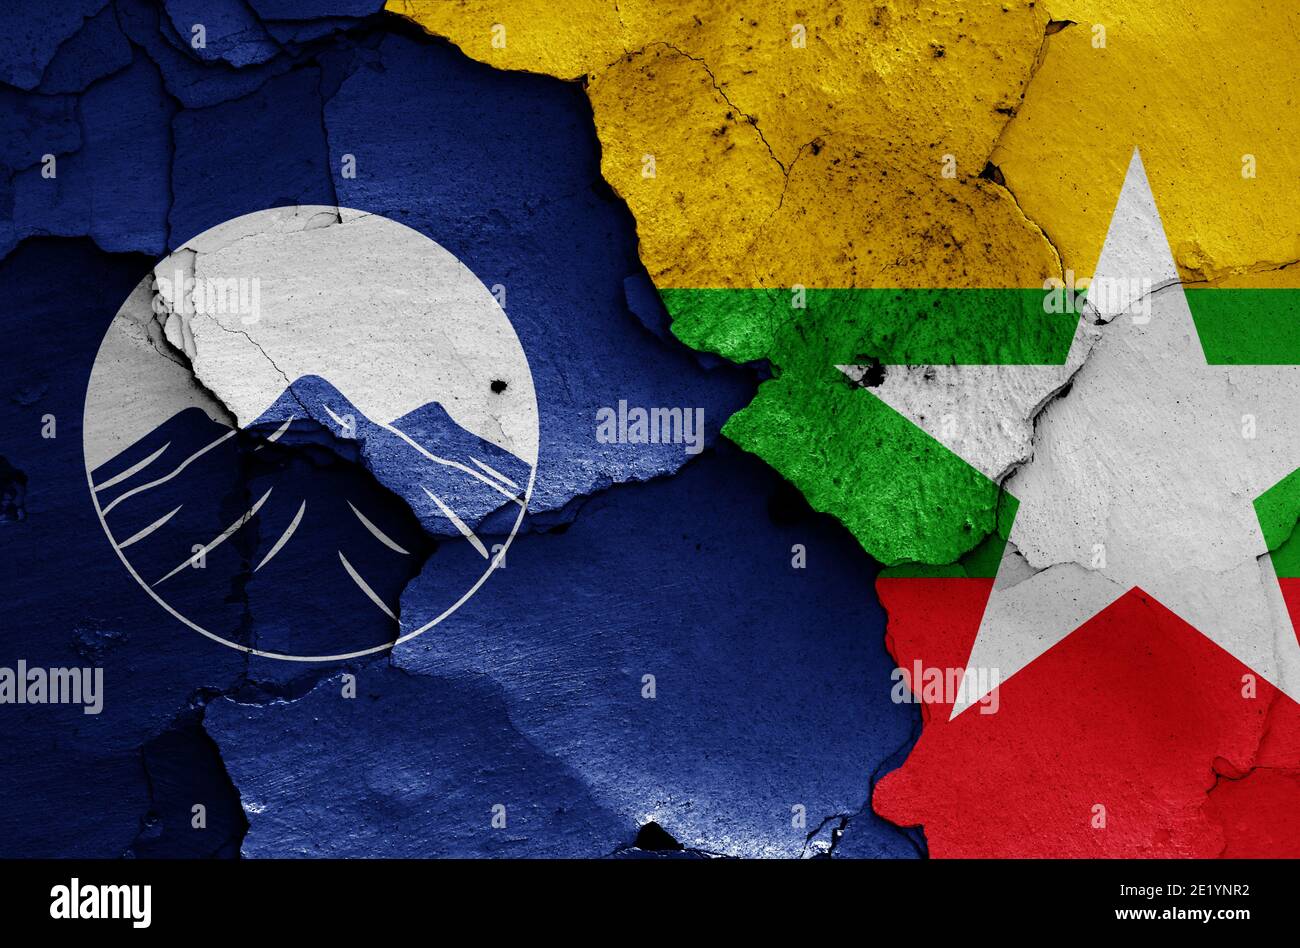 flags of Kachin State and Myanmar painted on cracked wall Stock Photo